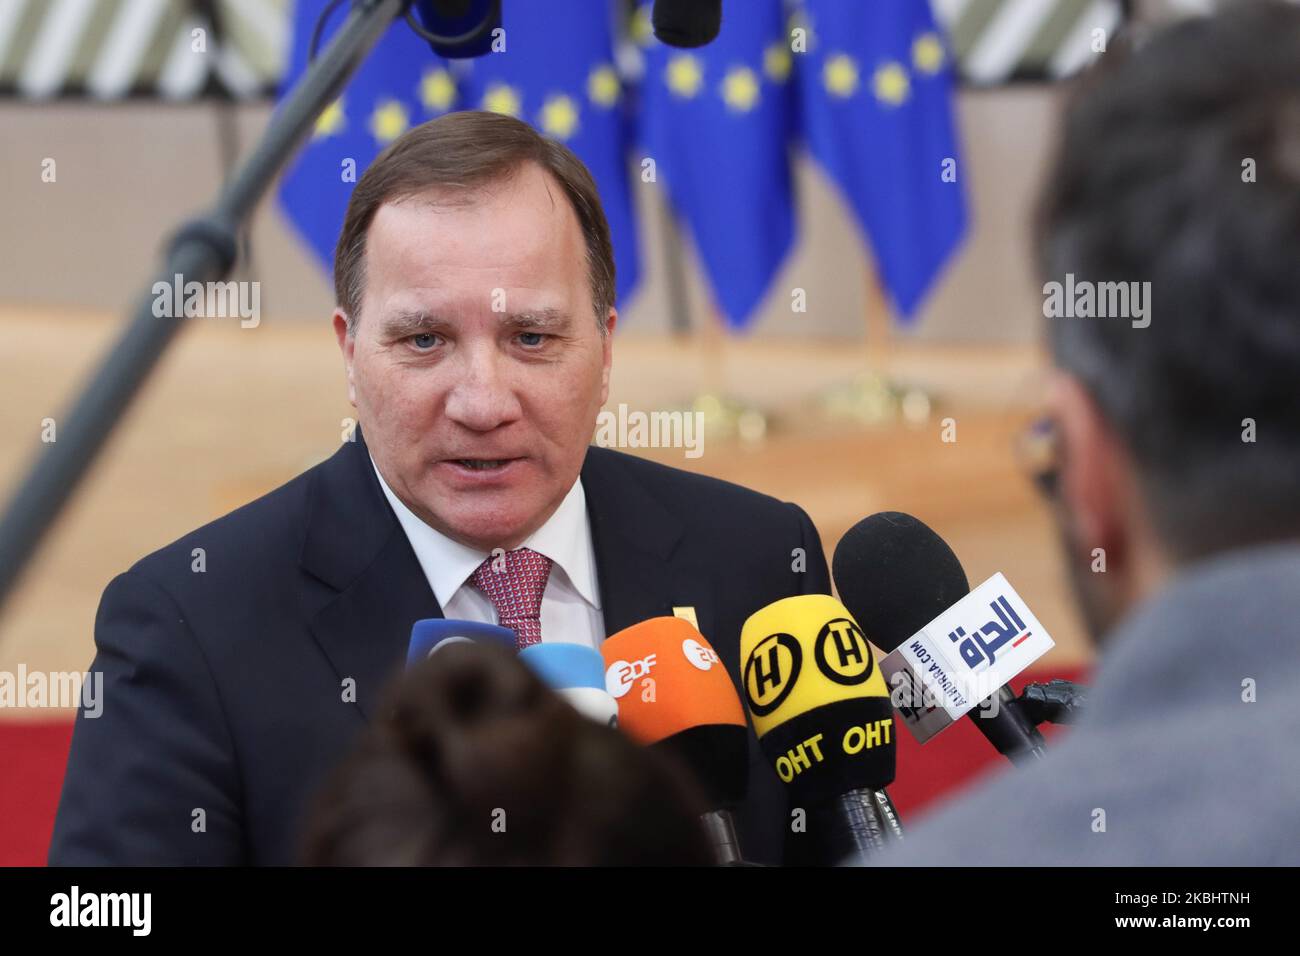 Kjell Stefan Löfven Prime Minister of Sweden as seen arriving at the European Council . Stefan Lofven the Swedish PM attends the EUCO, walking in Forum Europa building and talking to journalists, media and press representatives for the intense negotiations on the EU long term budget financial framework for 2021-2027 at a special European Council, EURO summit, EU leaders meeting in Brussels, Belgium. February 20, 2020 (Photo by Nicolas Economou/NurPhoto) Stock Photo